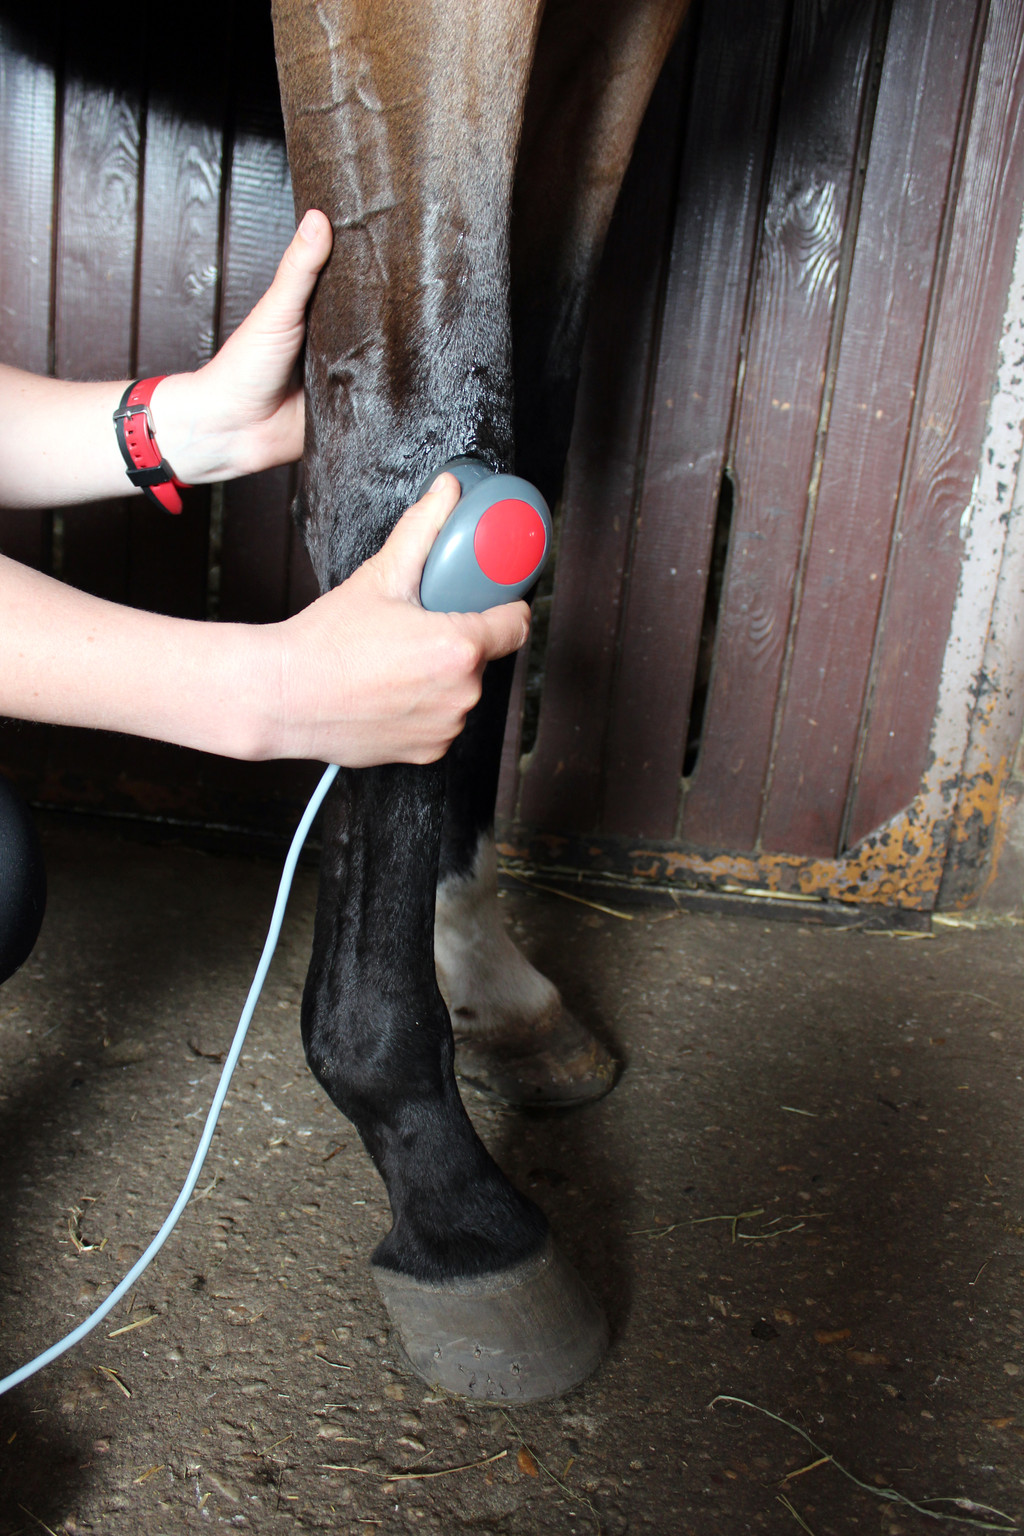 horse joint mobility limitations